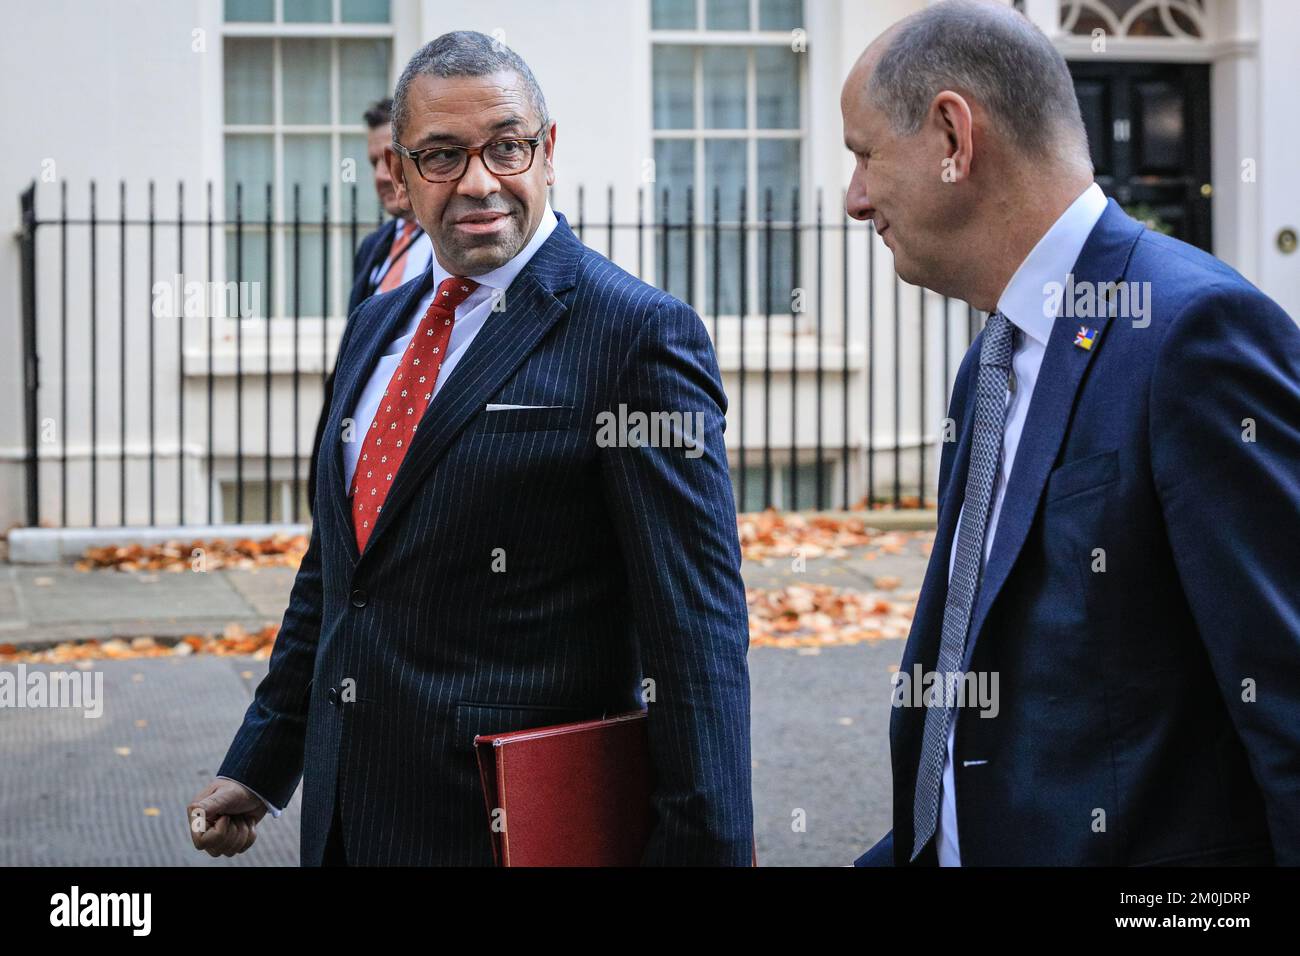 London, UK. 06th Dec, 2022. James Cleverly, MP, Secretary of State for Foreign, Commonwealth and Development Affairs (Foreign Secretary) walks with a colleague. Ministers in the Sunak government attend the weekly cabinet meeting at 10 Downing Street in Westminster today. Credit: Imageplotter/Alamy Live News Stock Photo